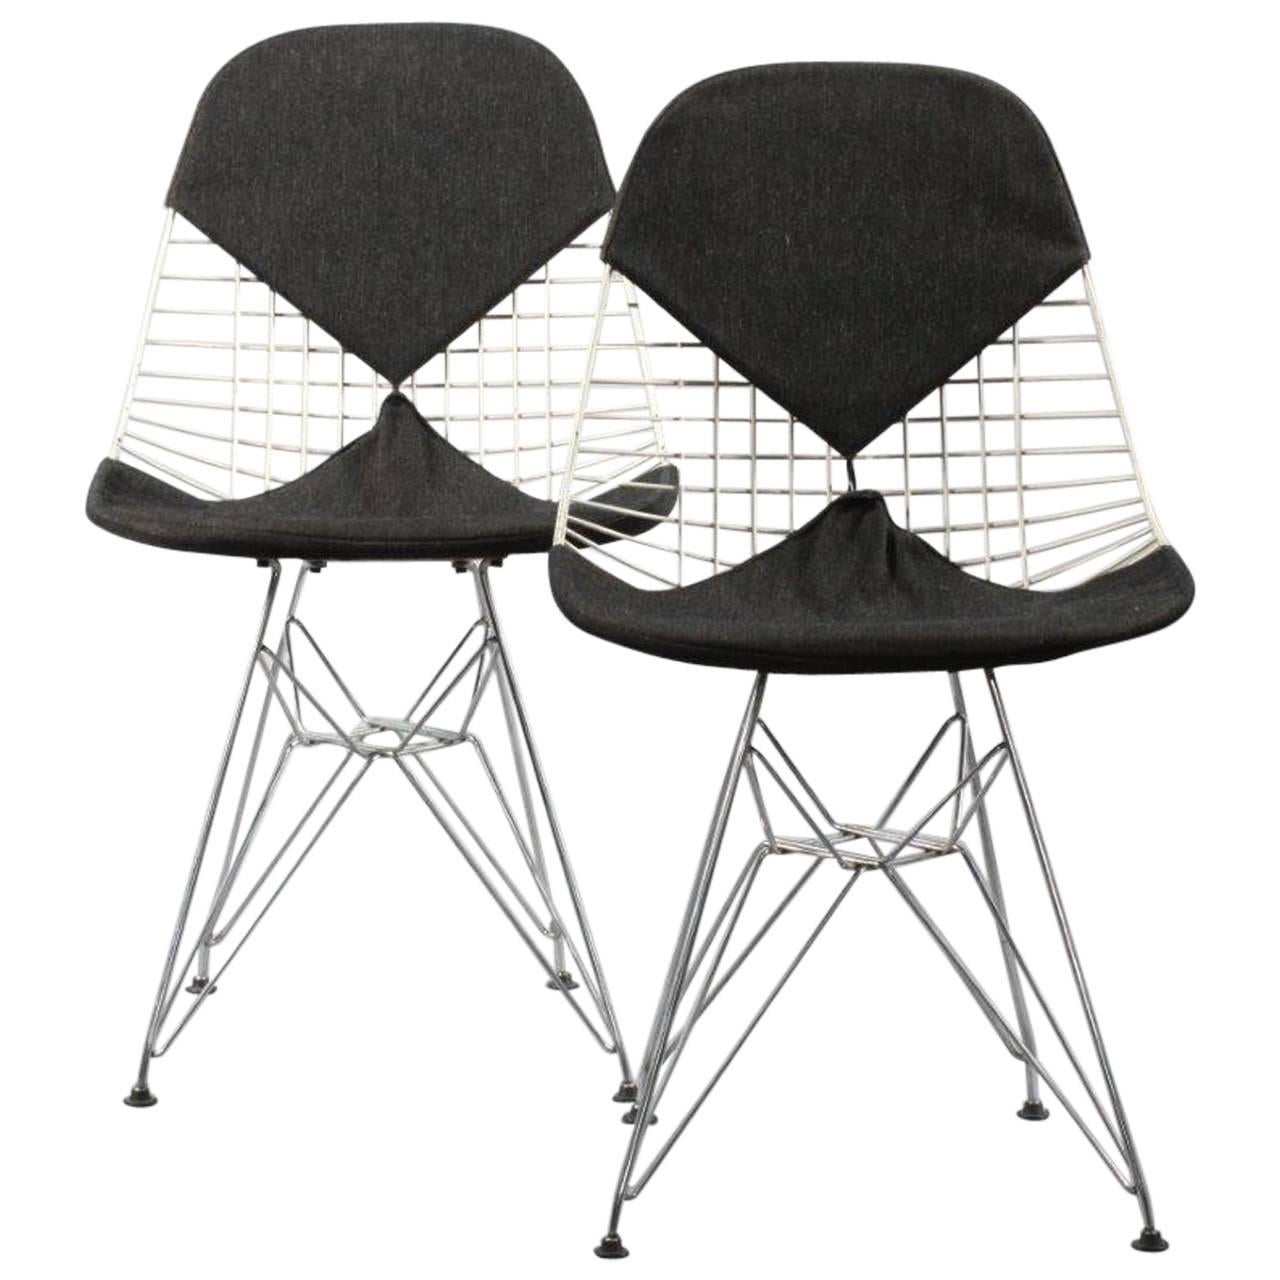 Pair of Early Bikini Chairs by Charles & Ray Eames DKR Dining Chair